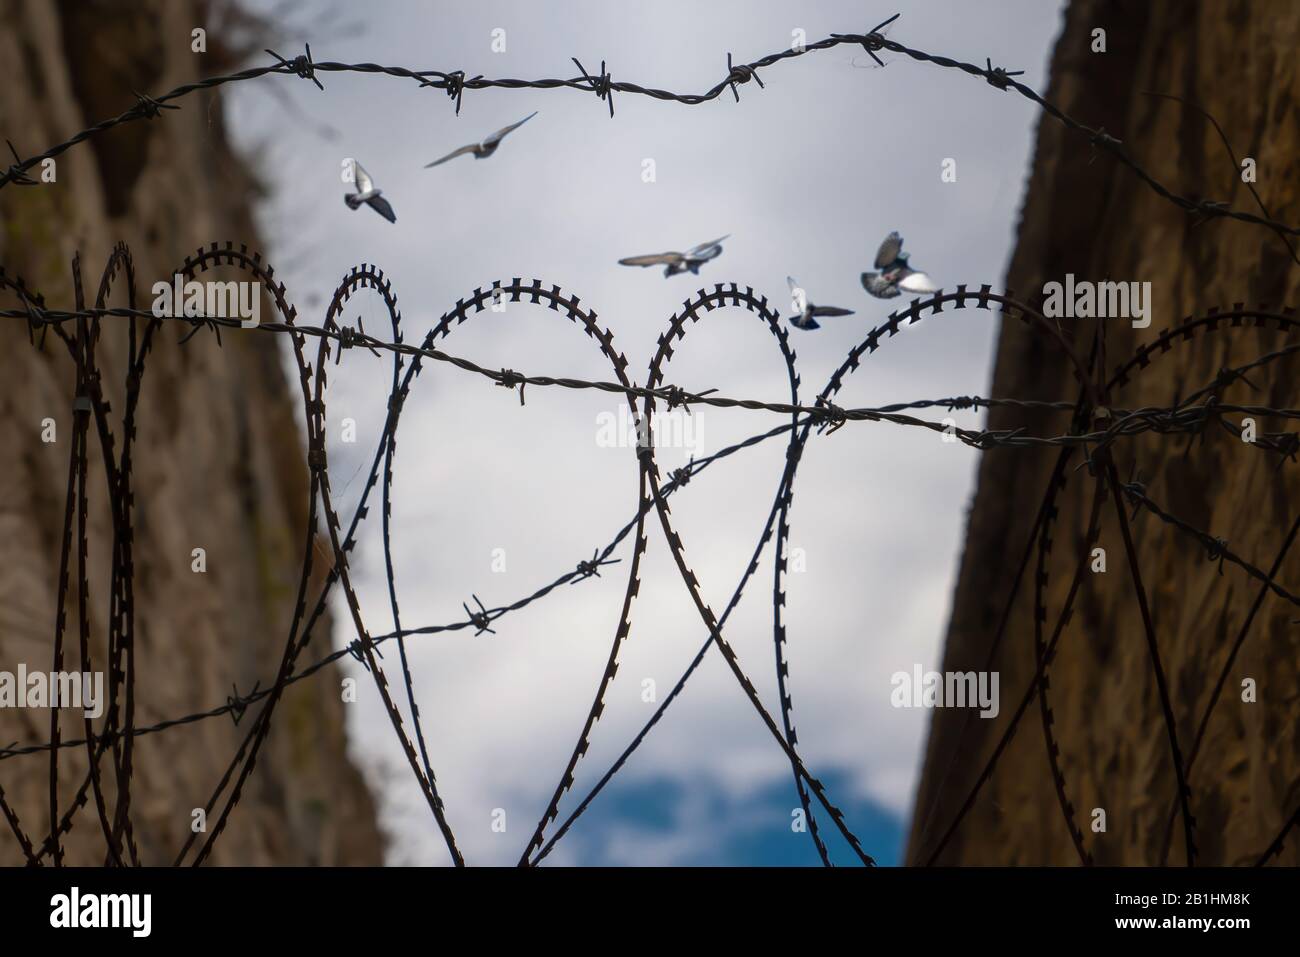 Barbed wire heart shape and blurred pigeons flying behind barbed wire.  Concept of hope of freedom Stock Photo - Alamy